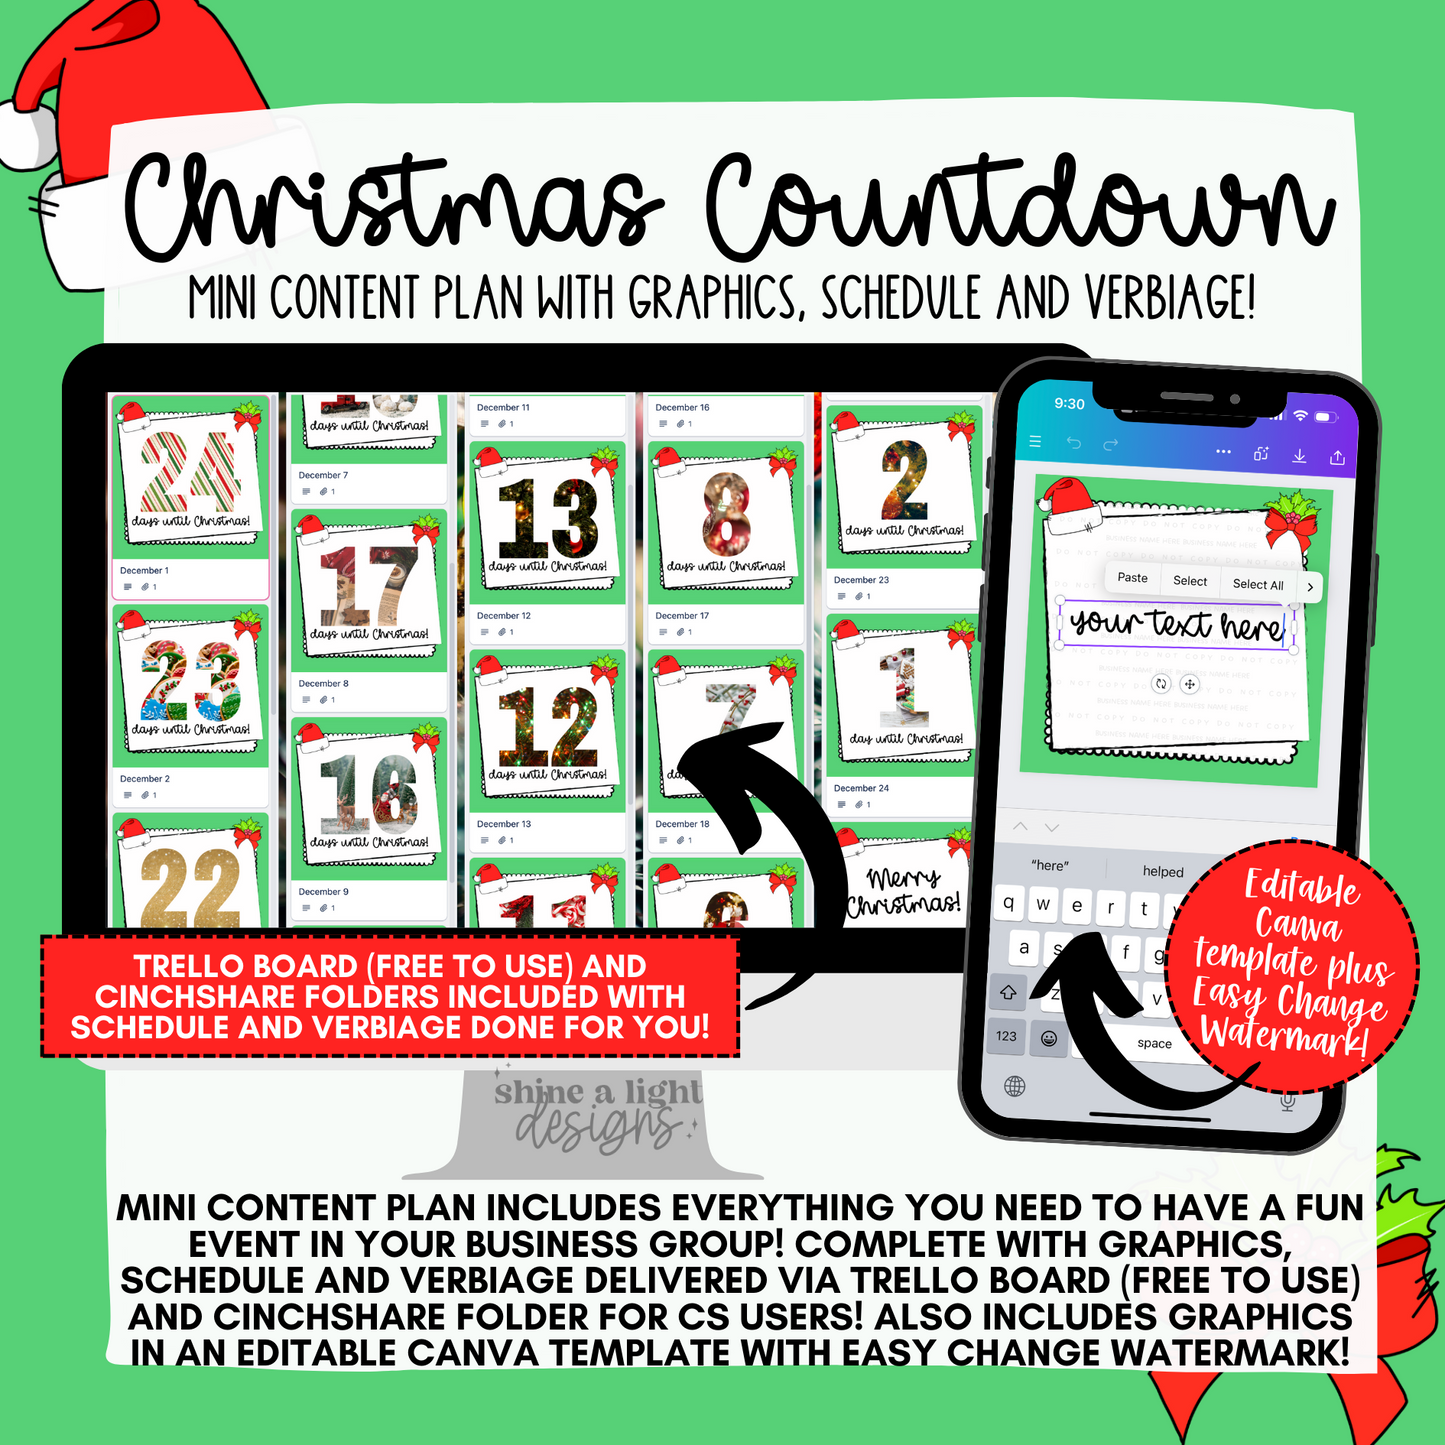 Christmas Countdown Mini Content Plan - Graphics, Schedule + Verbiage for Any Small Business!